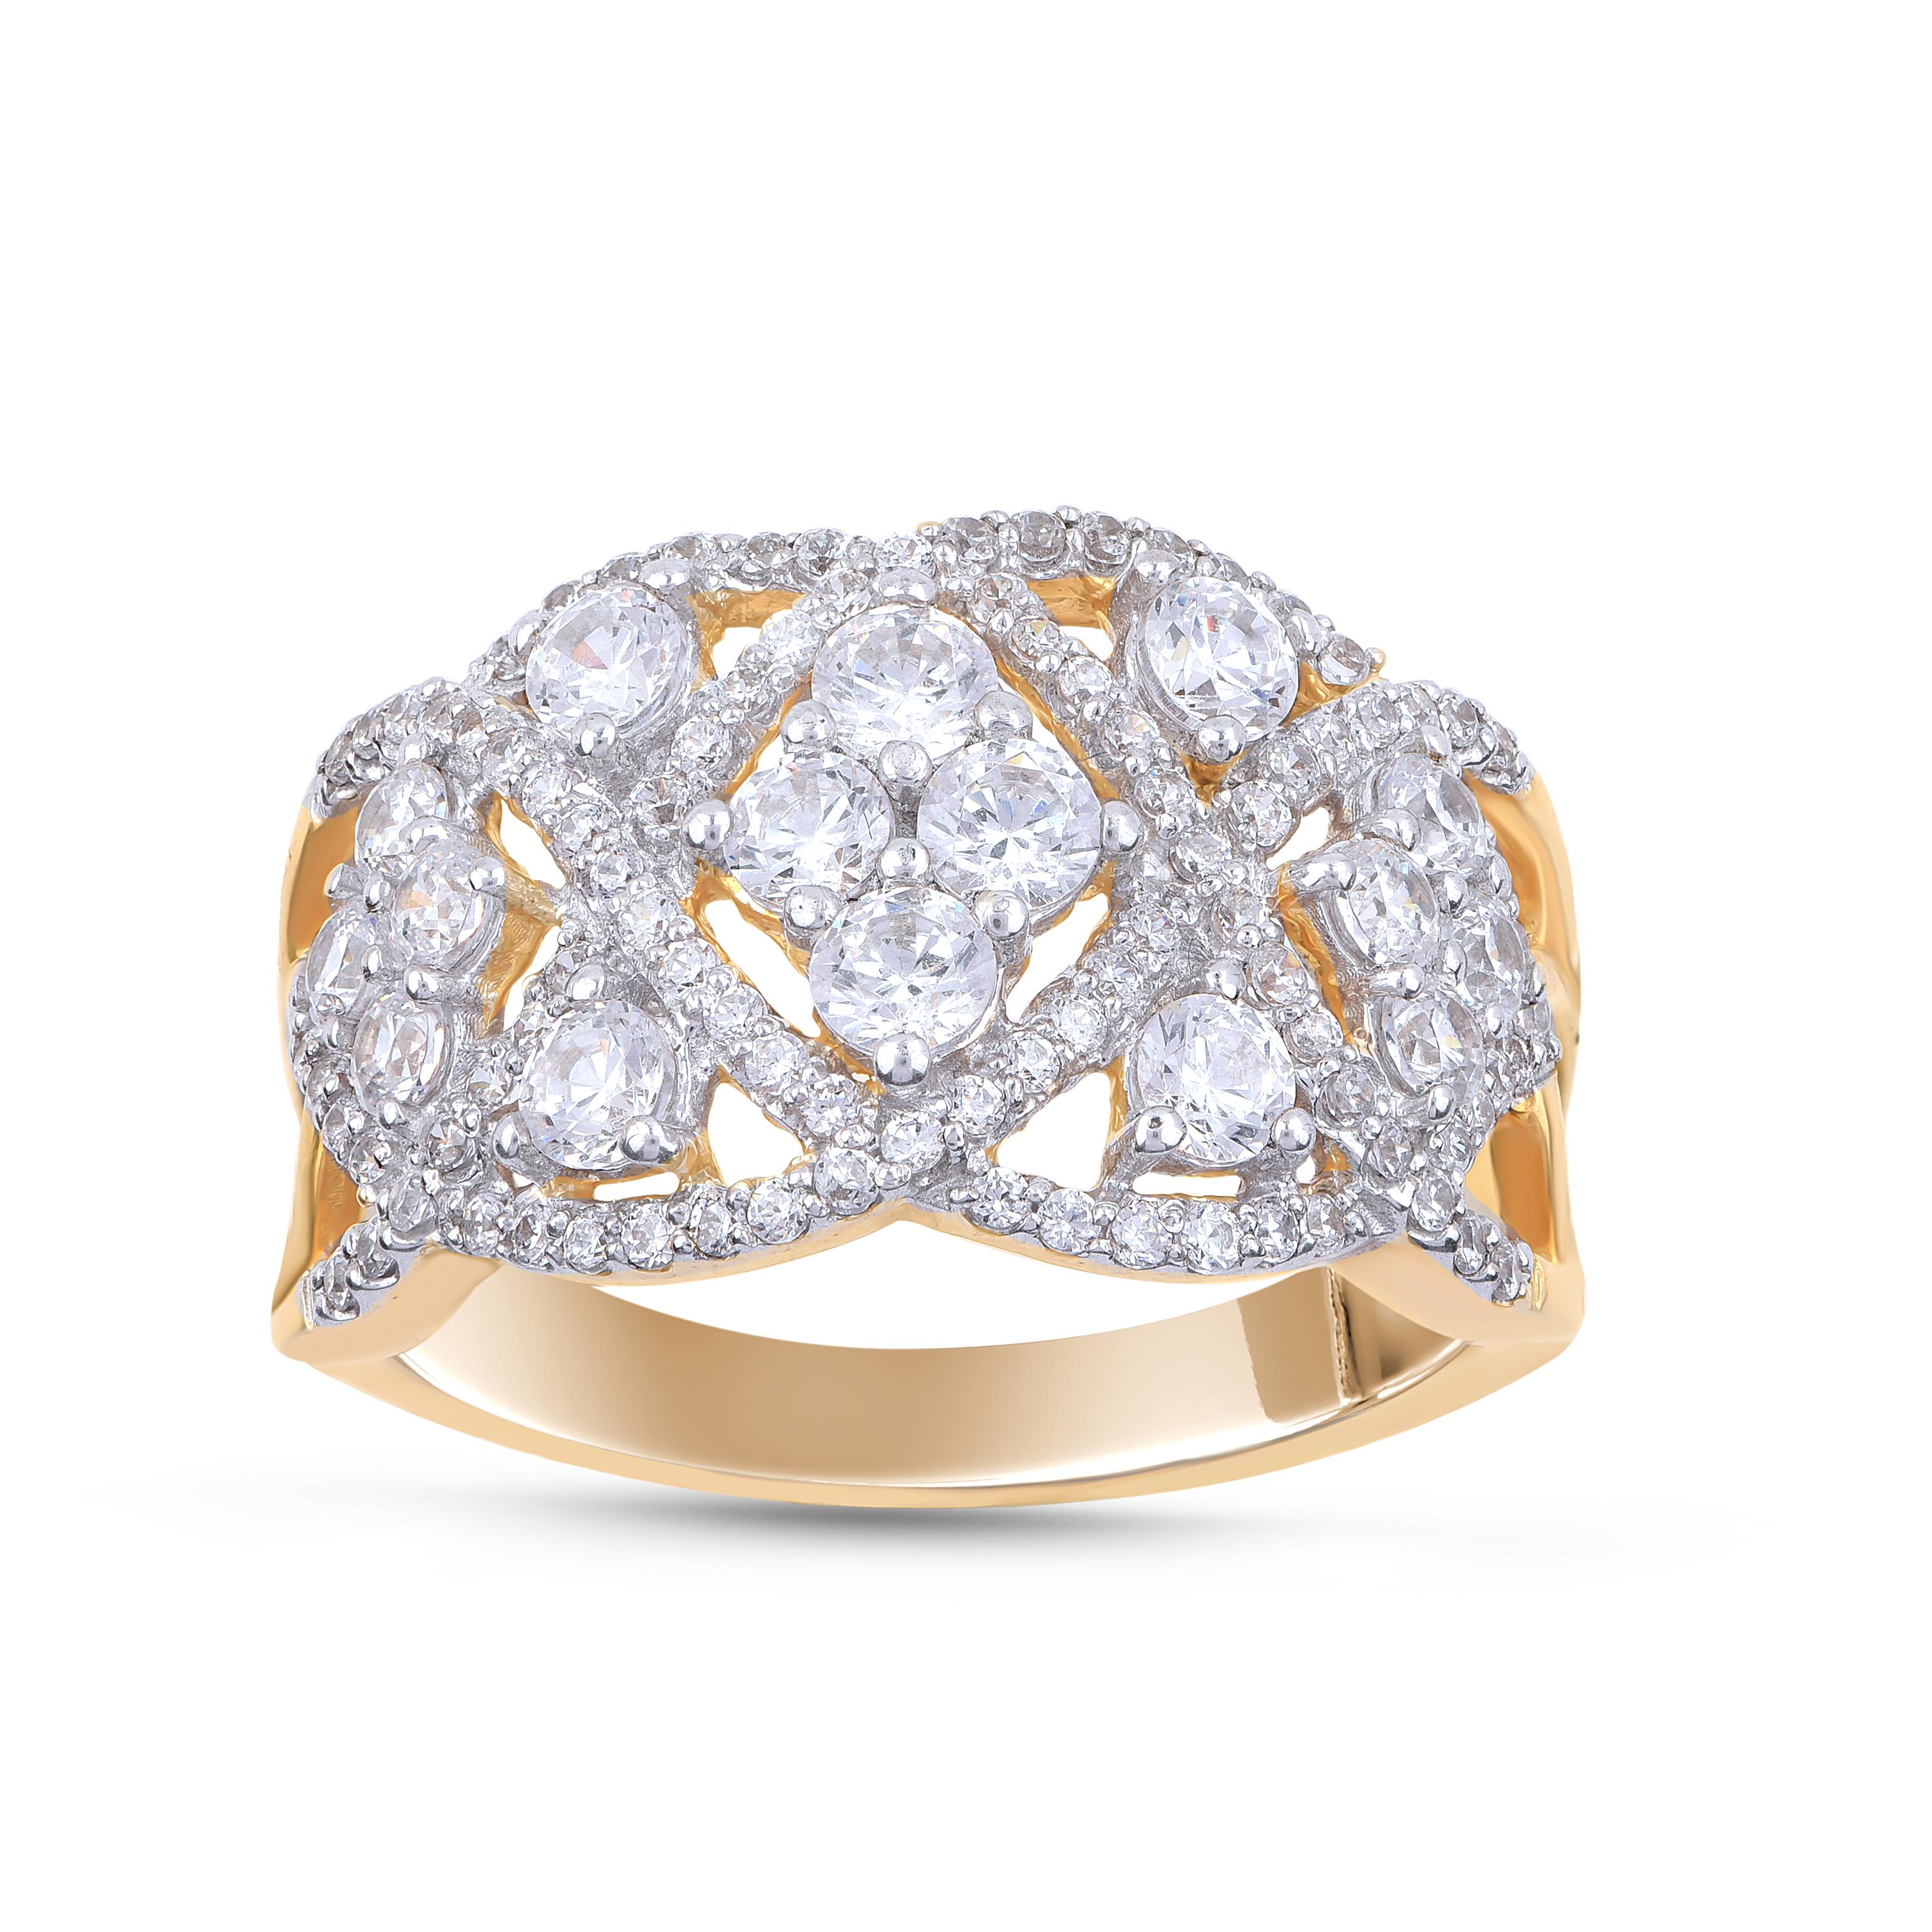 This beautiful diamond ring is studded with 110 brilliant diamonds set in prong setting in 18 kt yellow gold. Diamonds are graded H-I Color, I2 Clarity.  

Metal color and ring size can be customized on request. 

This piece is made to order. Please